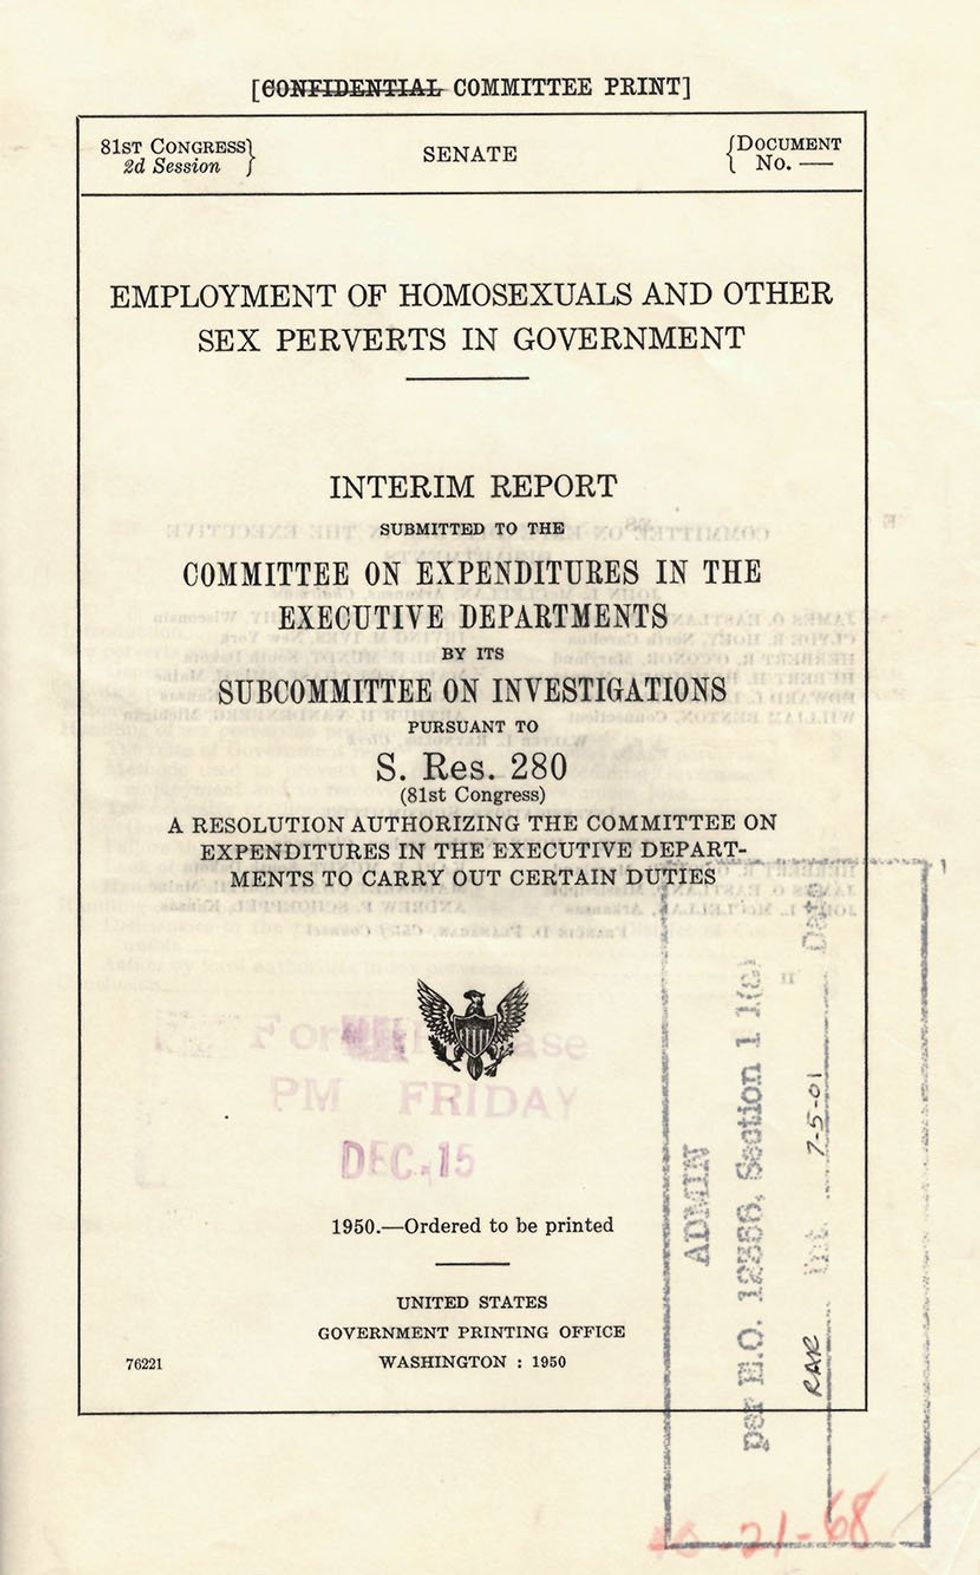 \u200bOn December 15, 1950, the Hoey committee released this report, concluding that homosexuals were unsuitable for employment in the Federal Government and constituted security risks in positions of public trust.